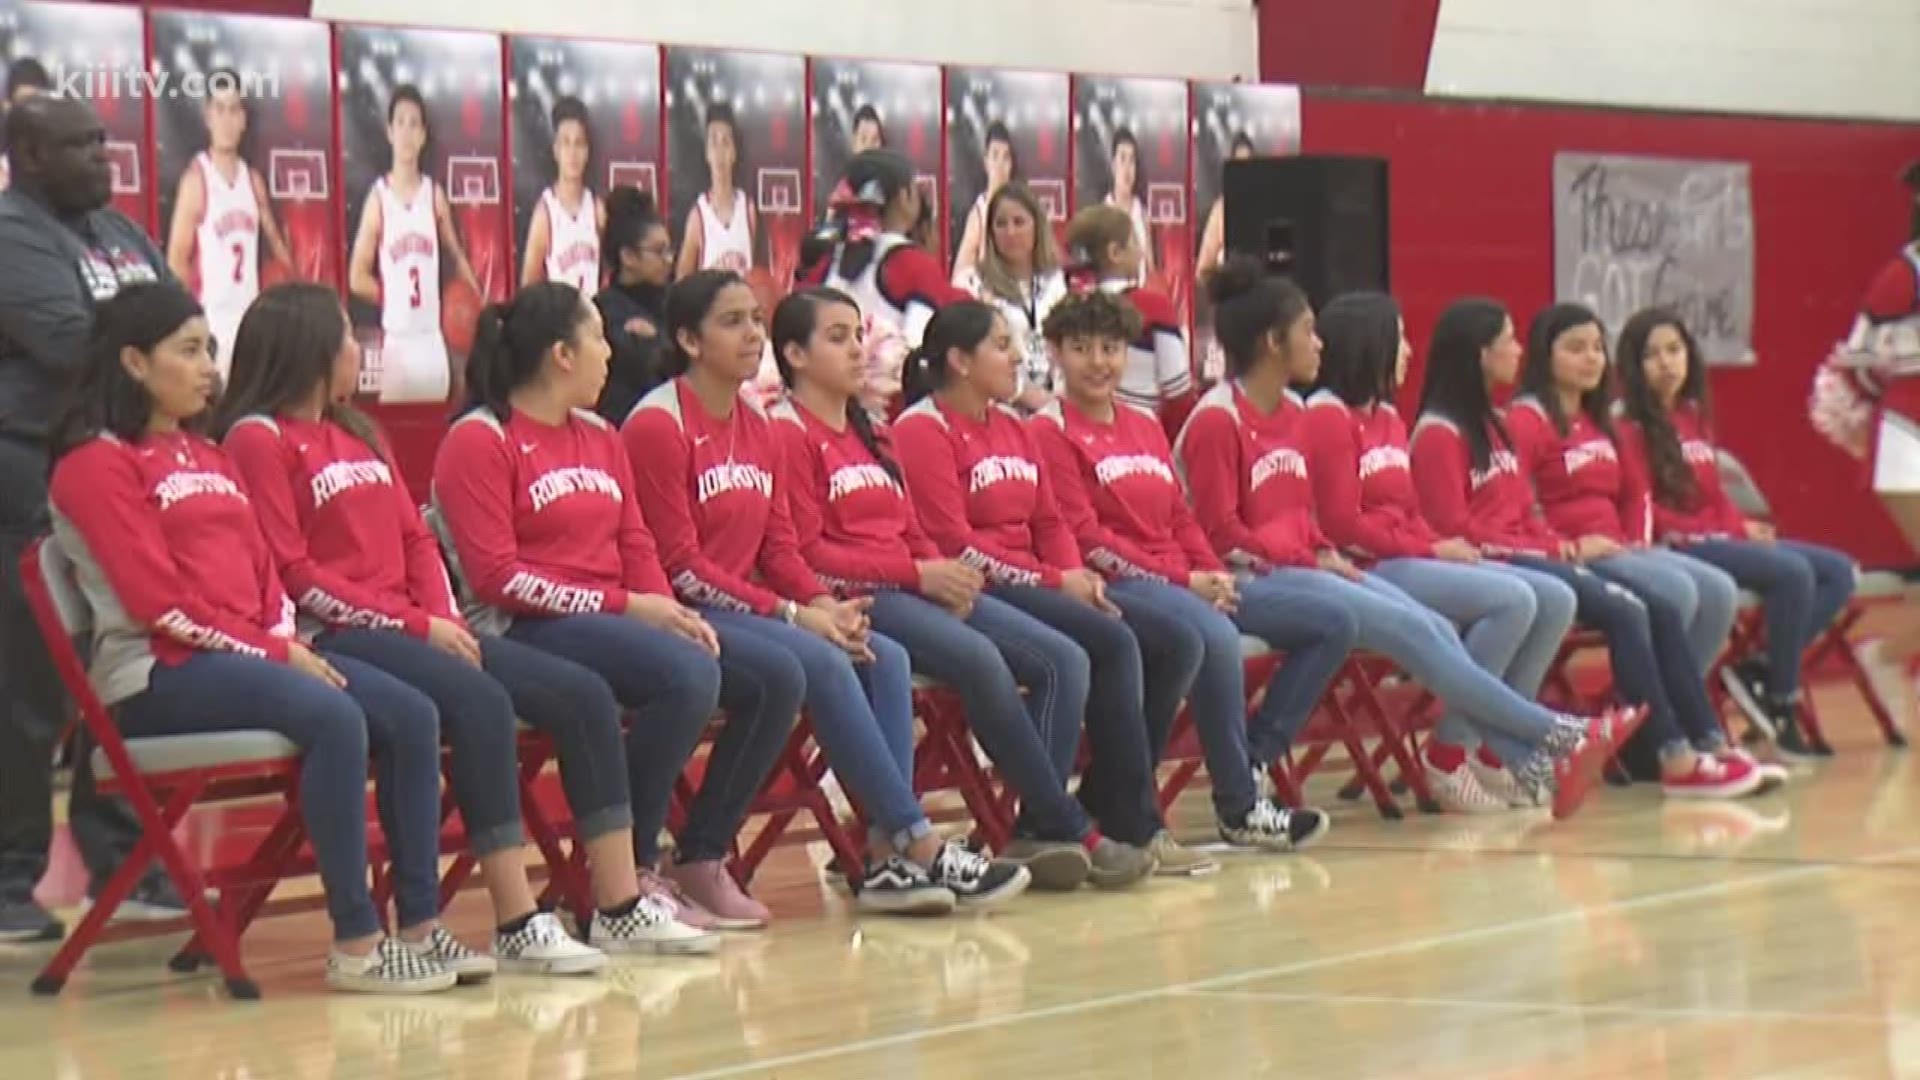 The Robstown girls basketball team is in the playoffs for the first time in program history.